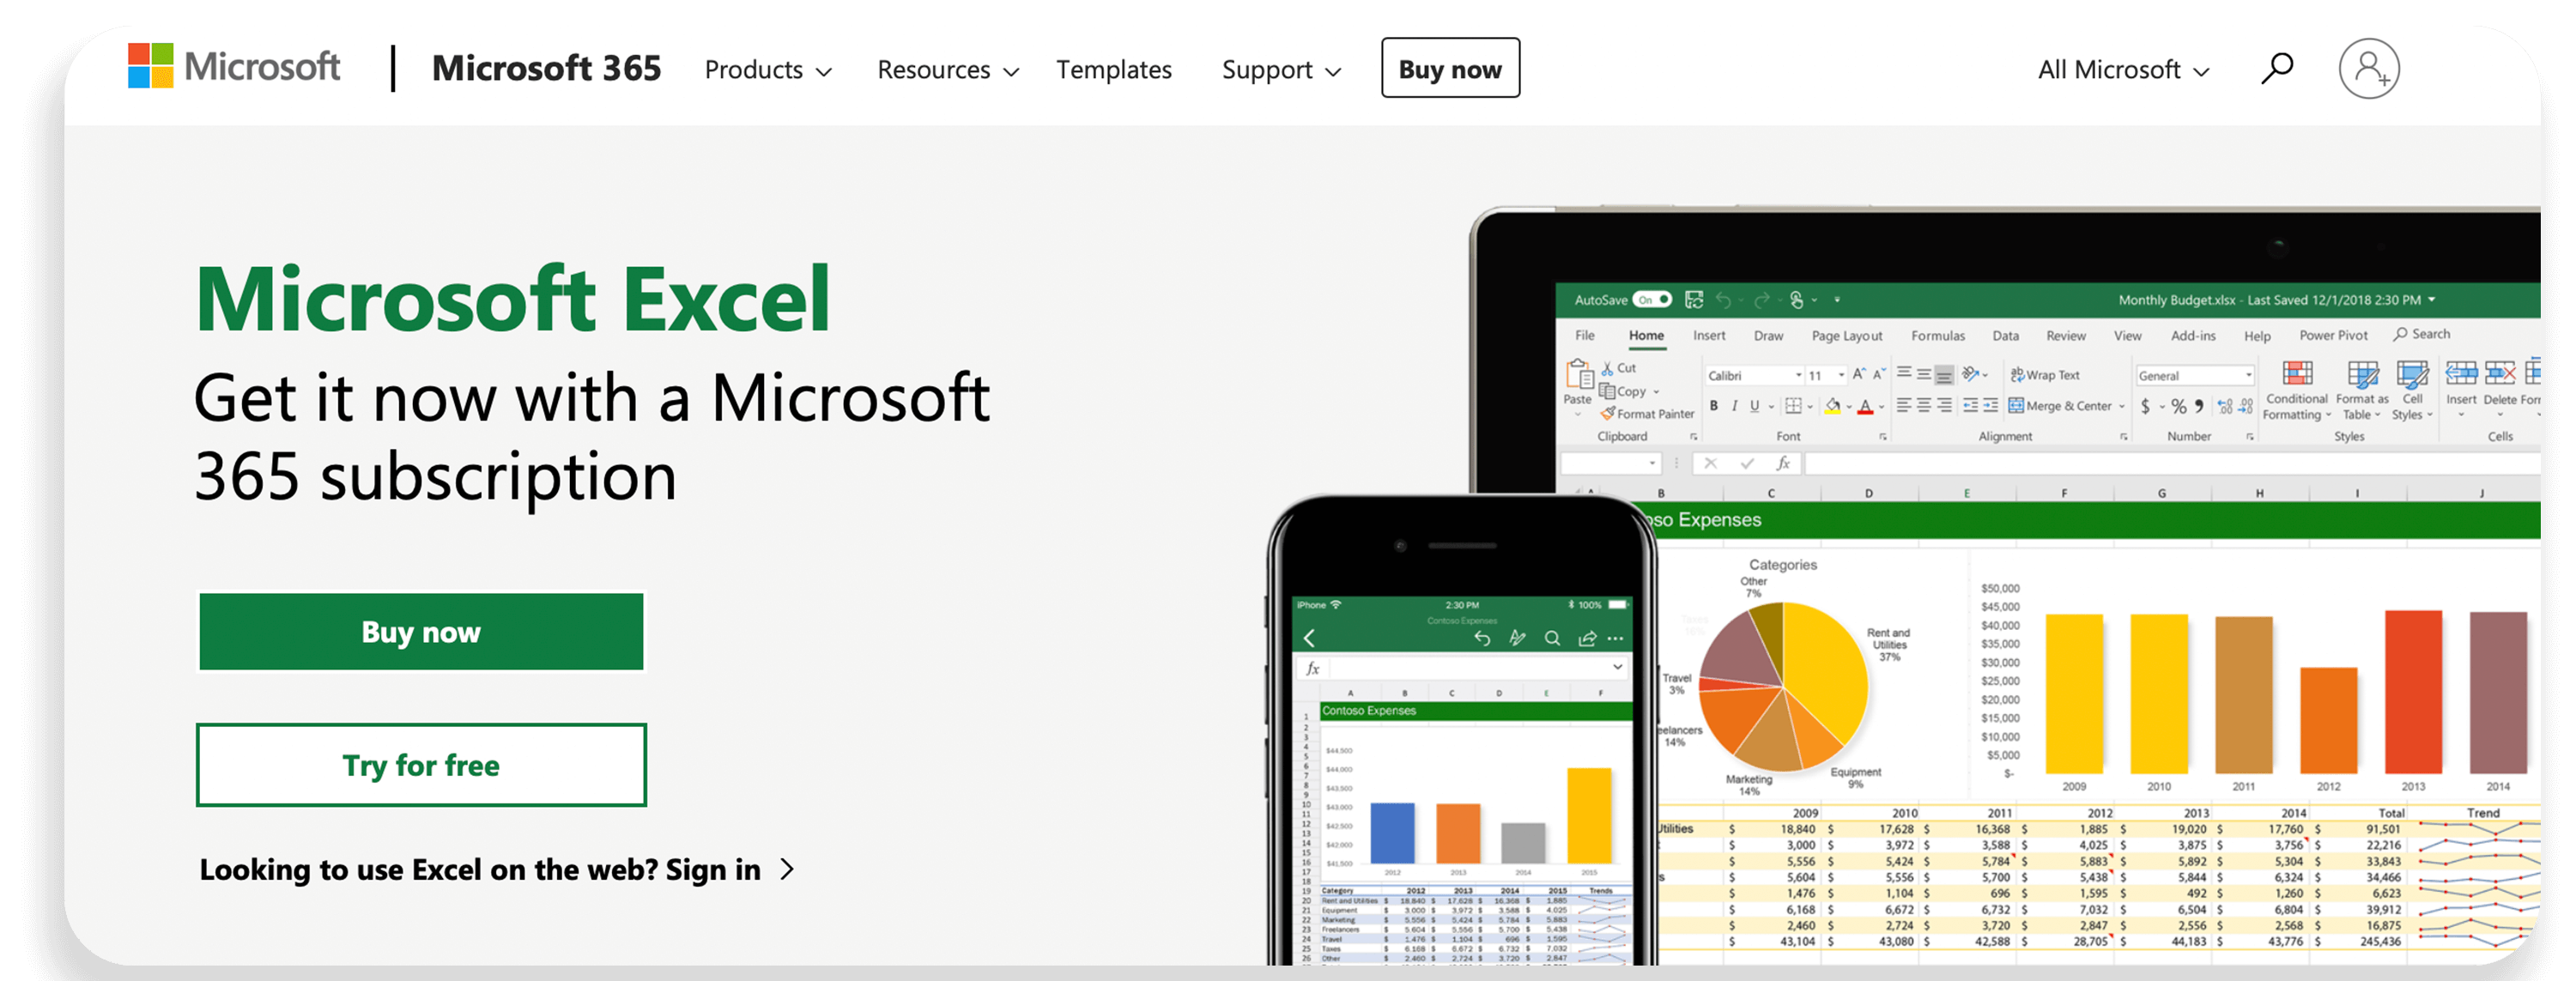 Microsoft Excel - Small Business Budgeting Software